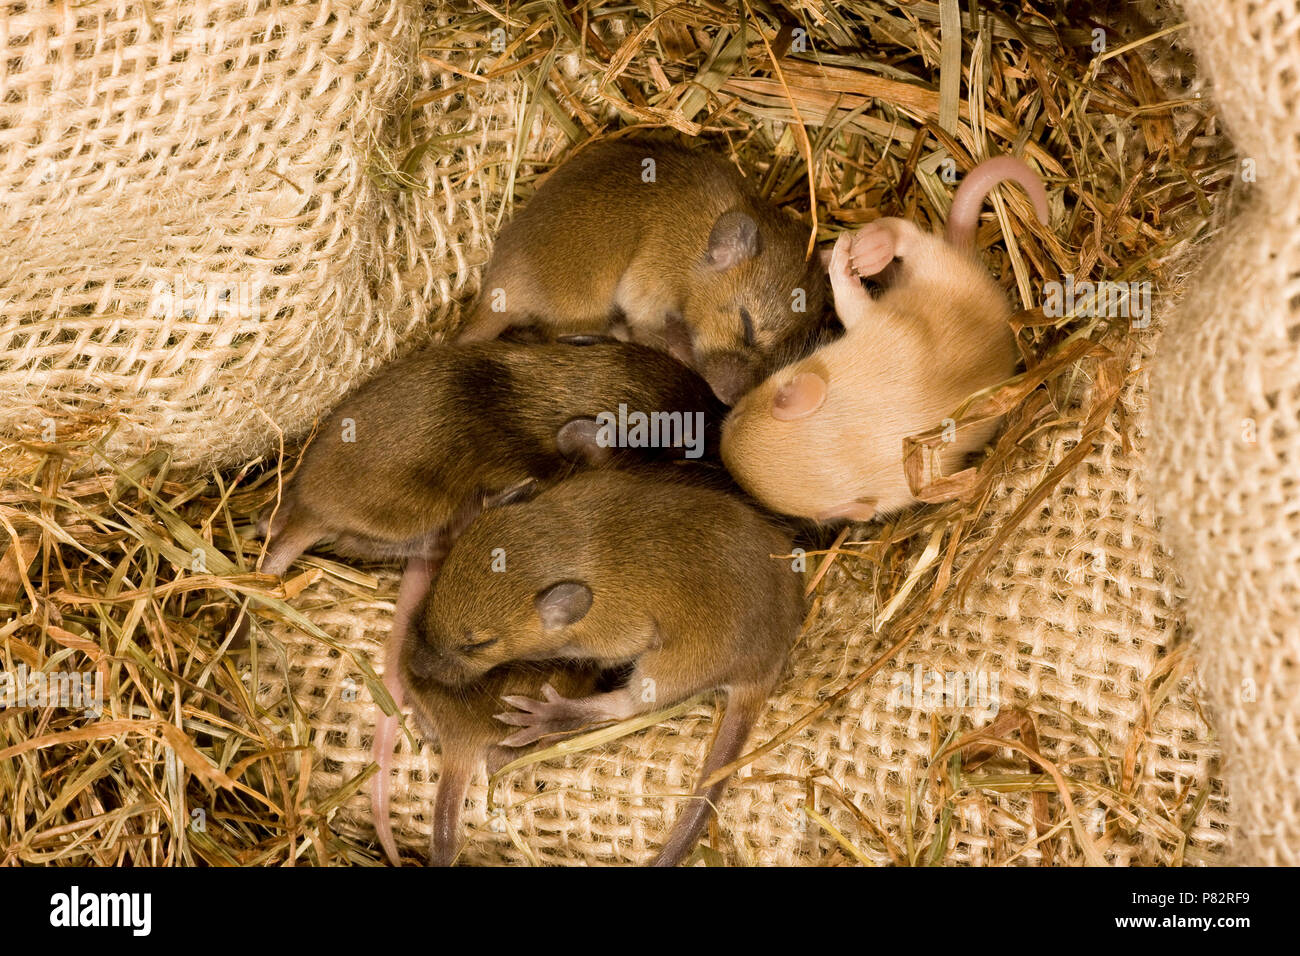 Huismuis met nestje in huis; House Mouse with nest in house Stock Photo